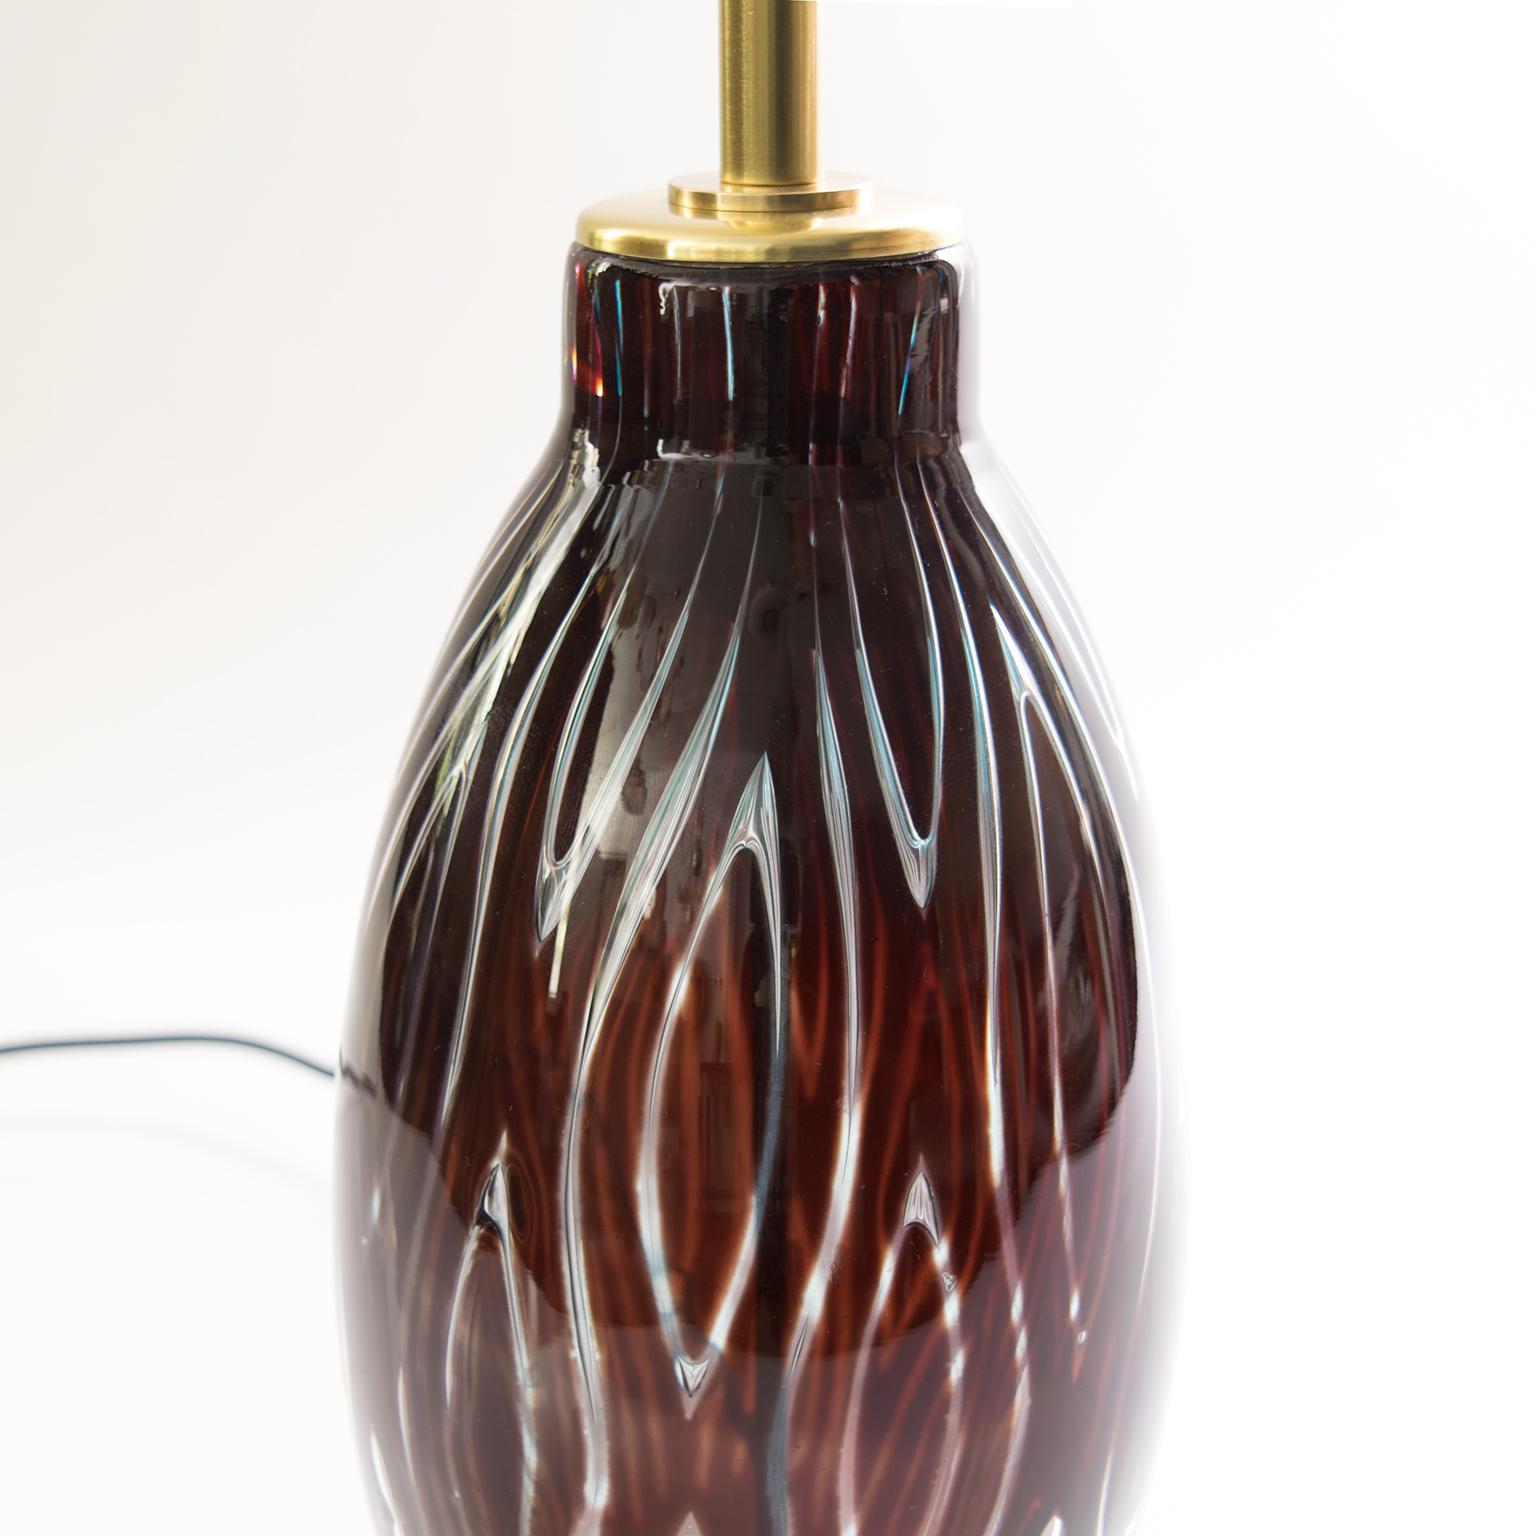 Scandinavian Modern Glass Table Lamp by Edvin Ohrstrom for Orrefors, 1958 In Good Condition For Sale In New York, NY